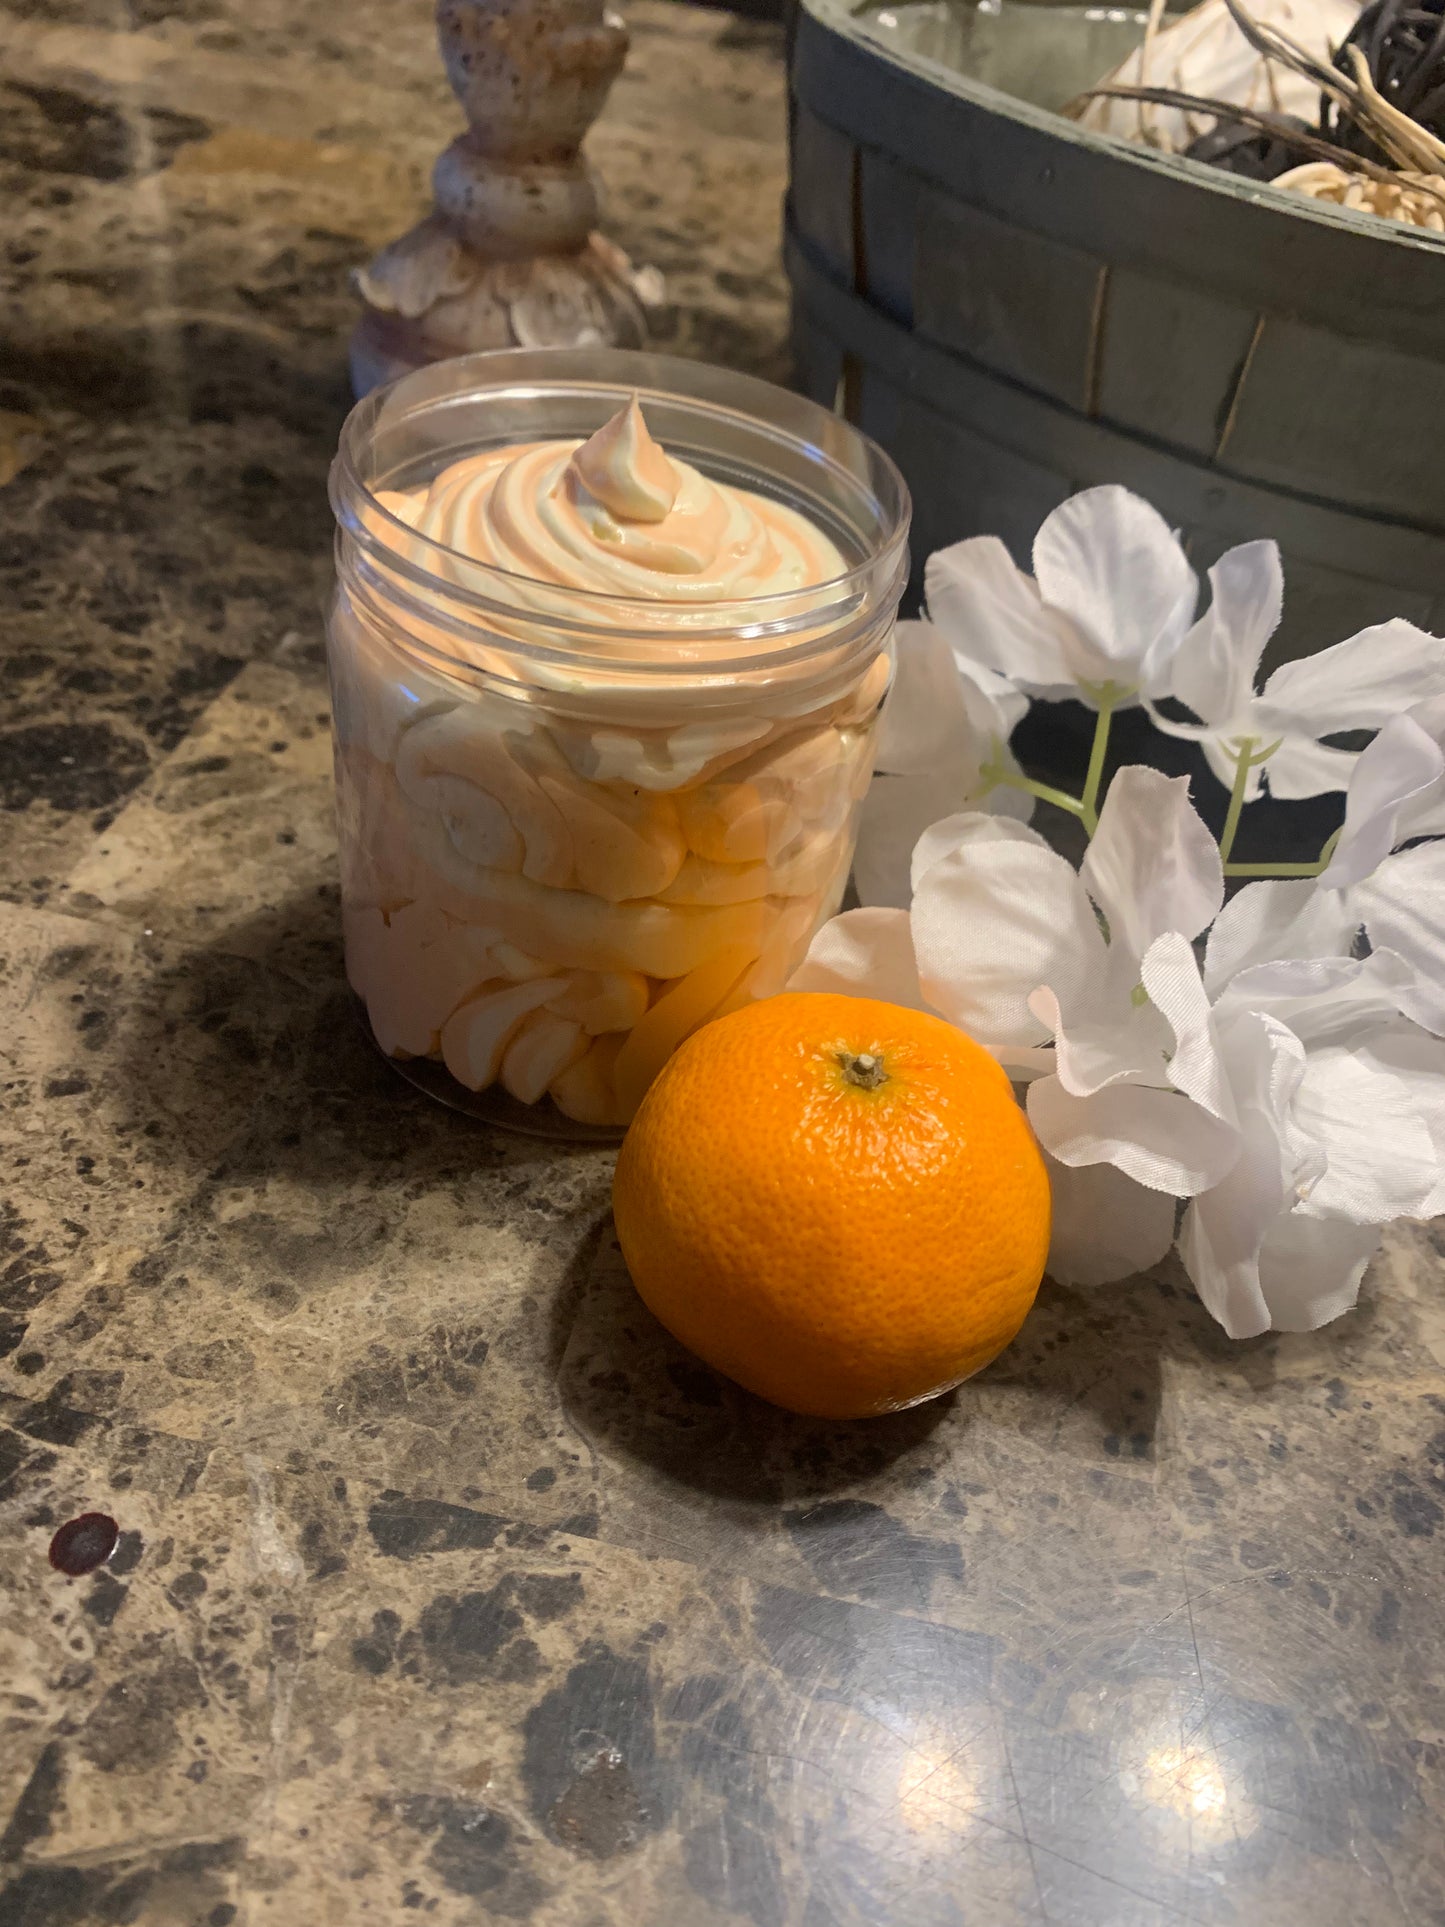 Orange Creamsicle Whipped Body Butter